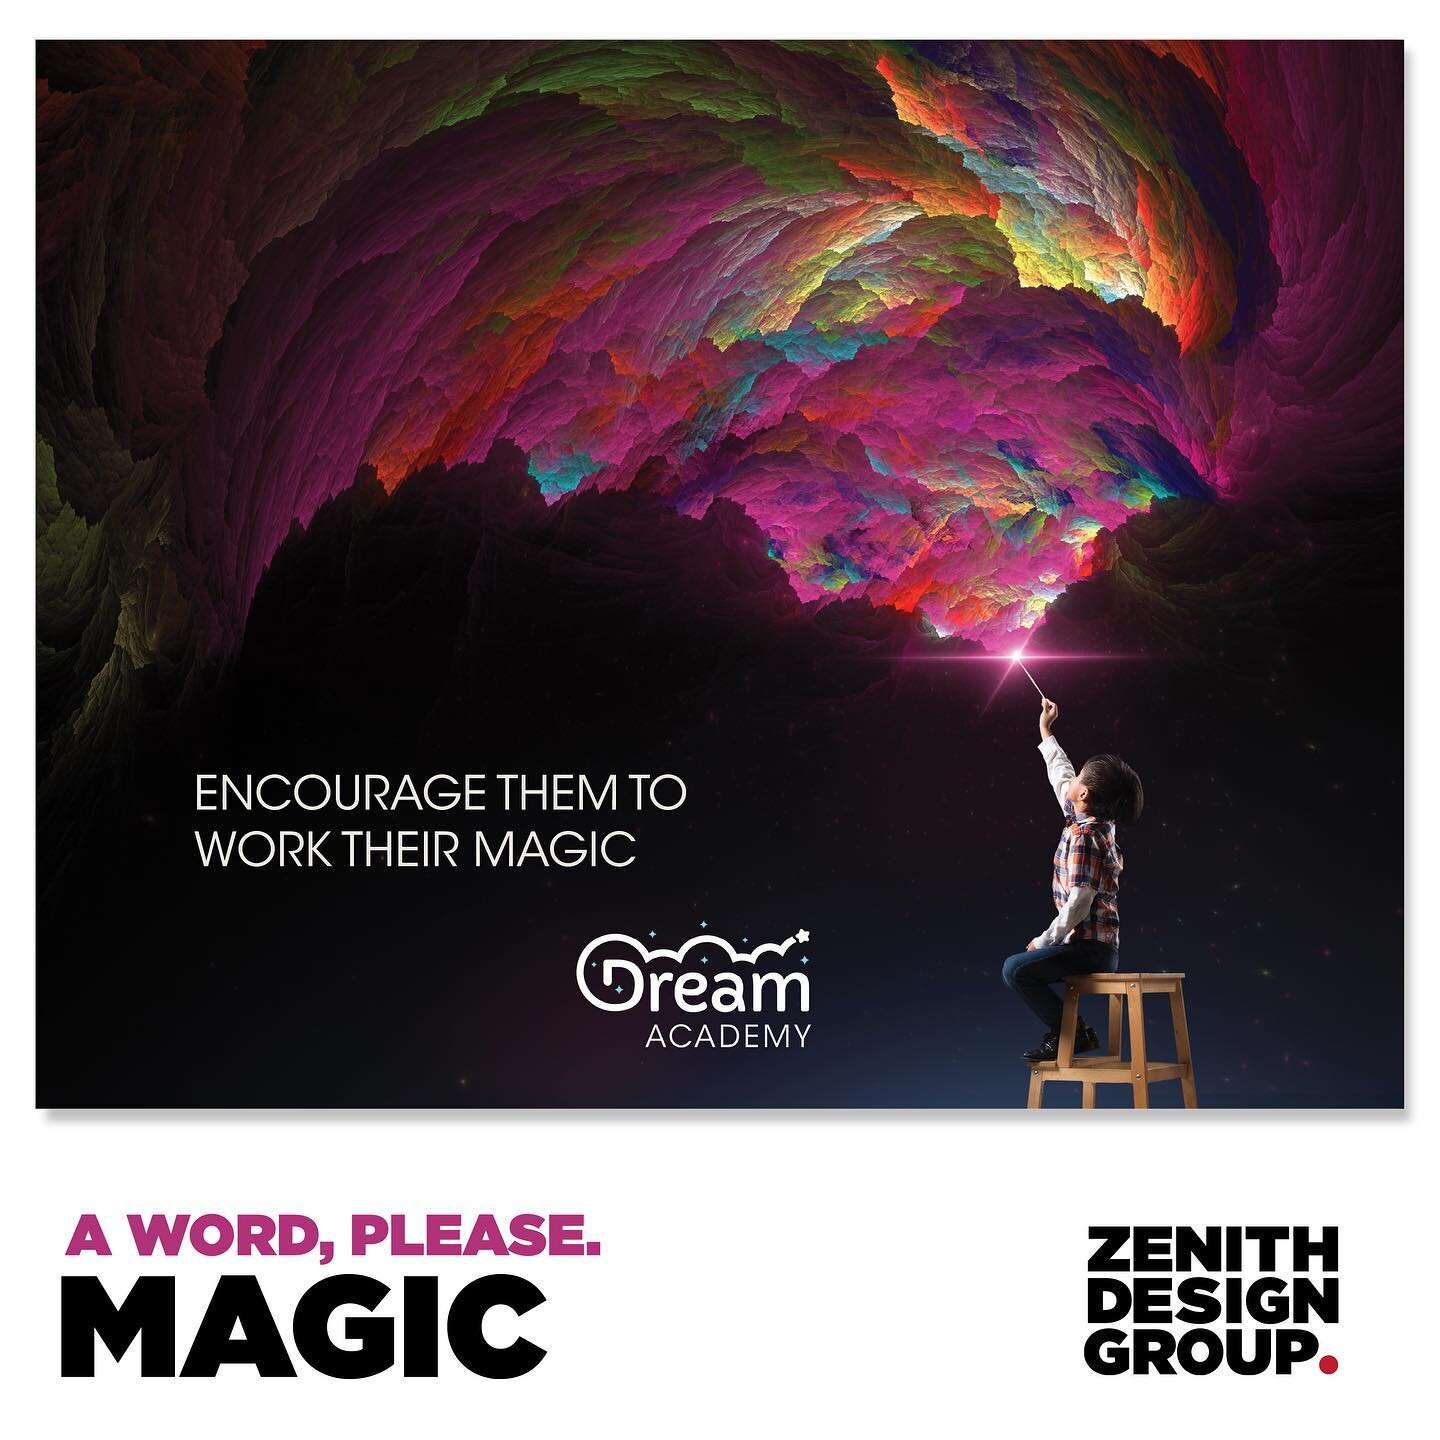 A WORD, PLEASE: WEEK TWELVE

This week&rsquo;s word had us thinking of the creative potential in the developing minds of kids. Remember when we were encouraged to dream big, play hard, think, question, and ponder? It&rsquo;s a skill set too many adul